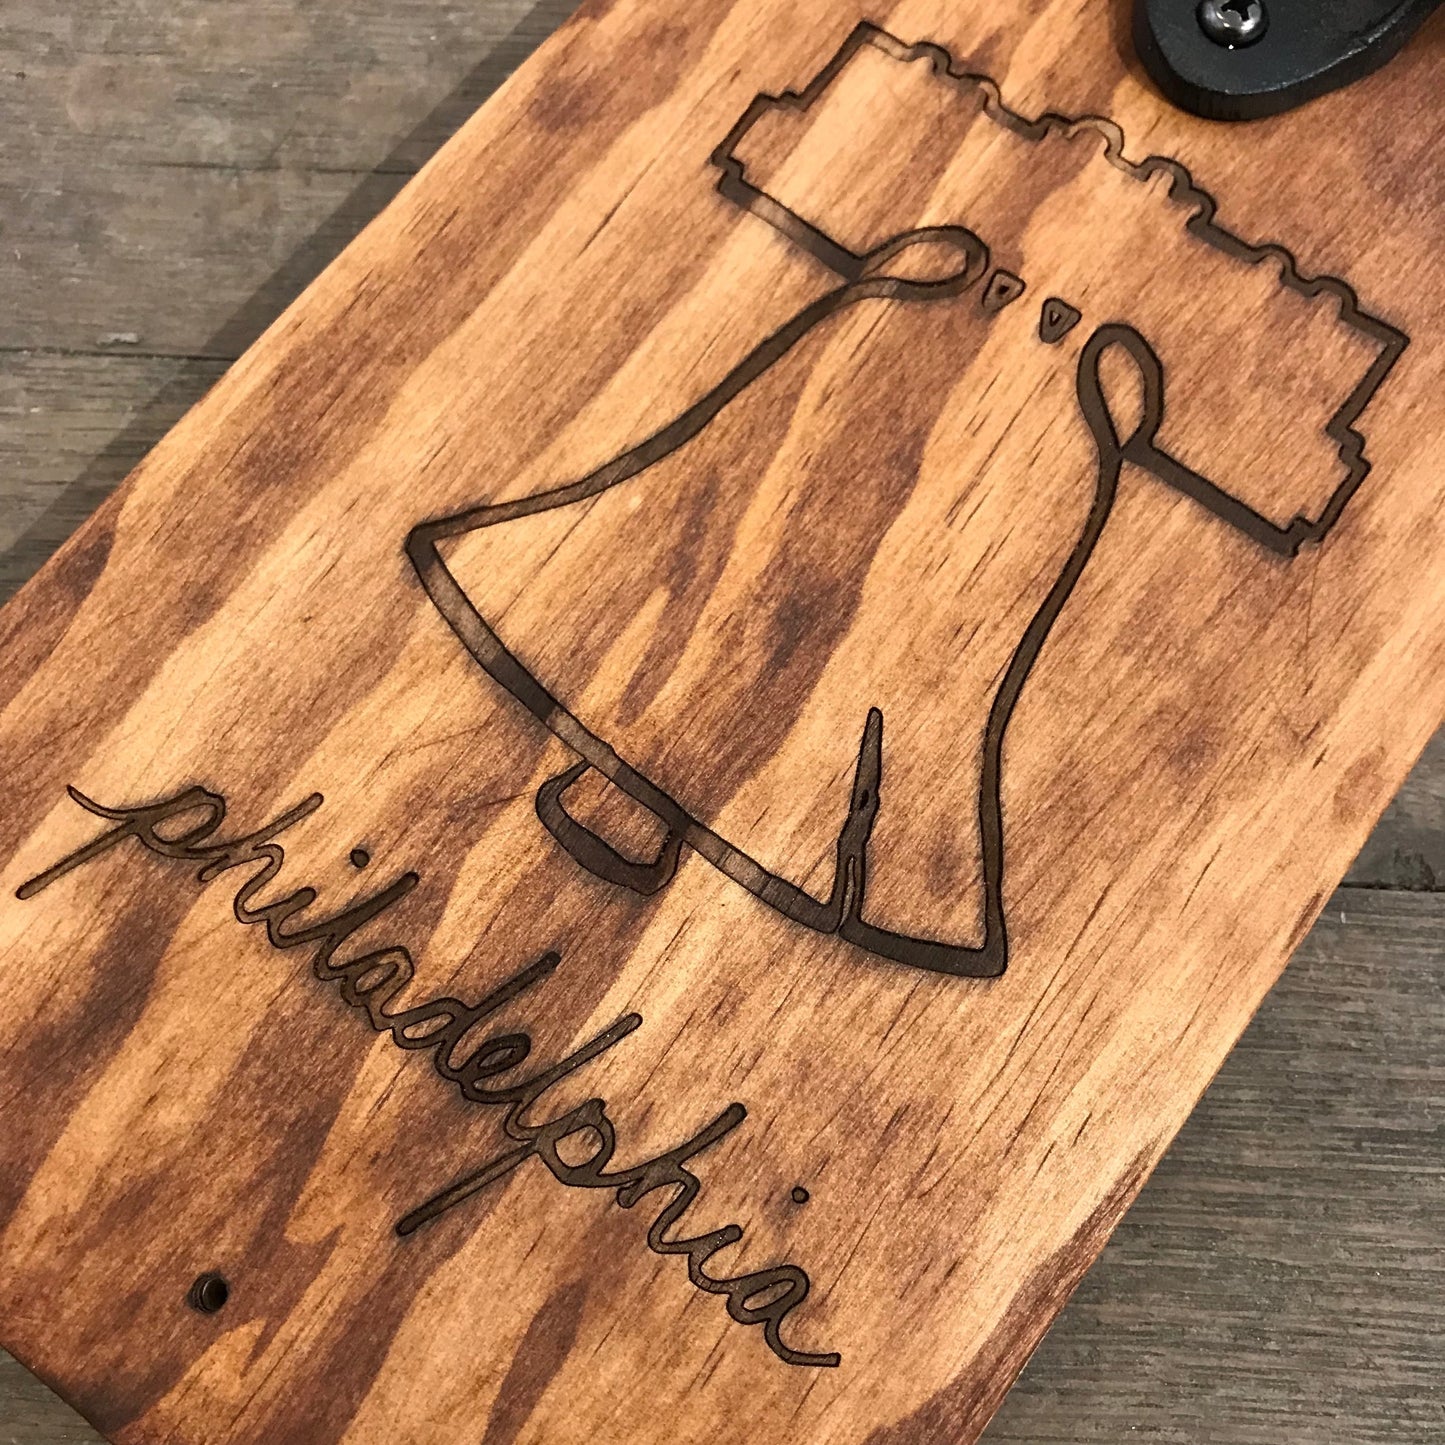 Wooden board with a detailed laser-etched engraving of the Liberty Bell and the word "Philadelphia" inscribed below it from Philly Phlights.